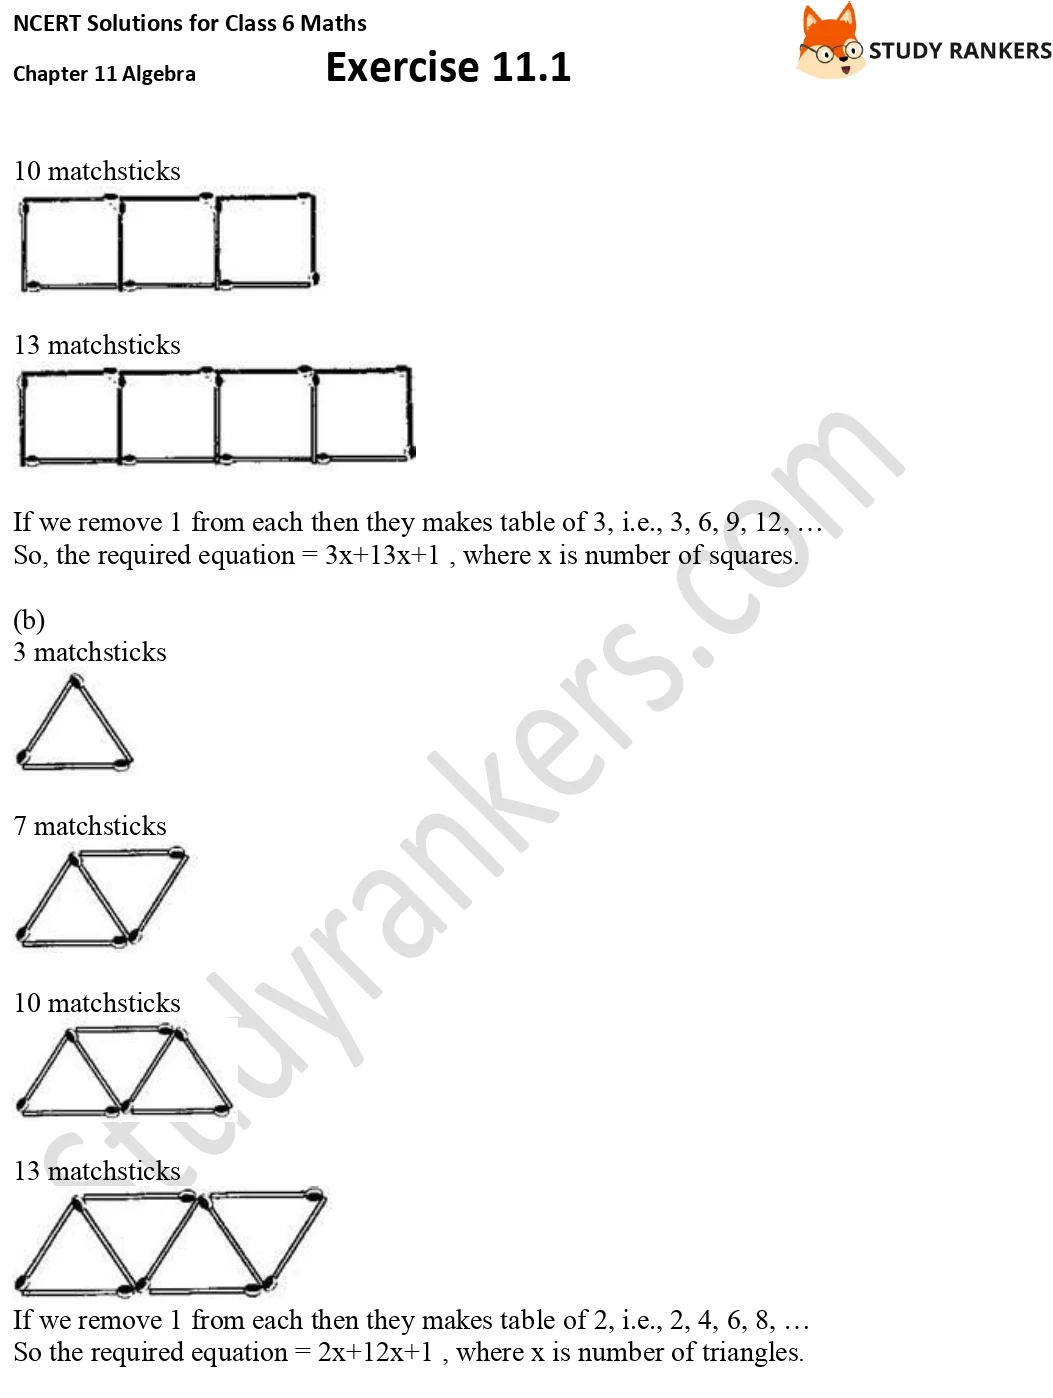 NCERT Solutions for Class 6 Maths Chapter 11 Algebra Exercise 11.1 Part 5